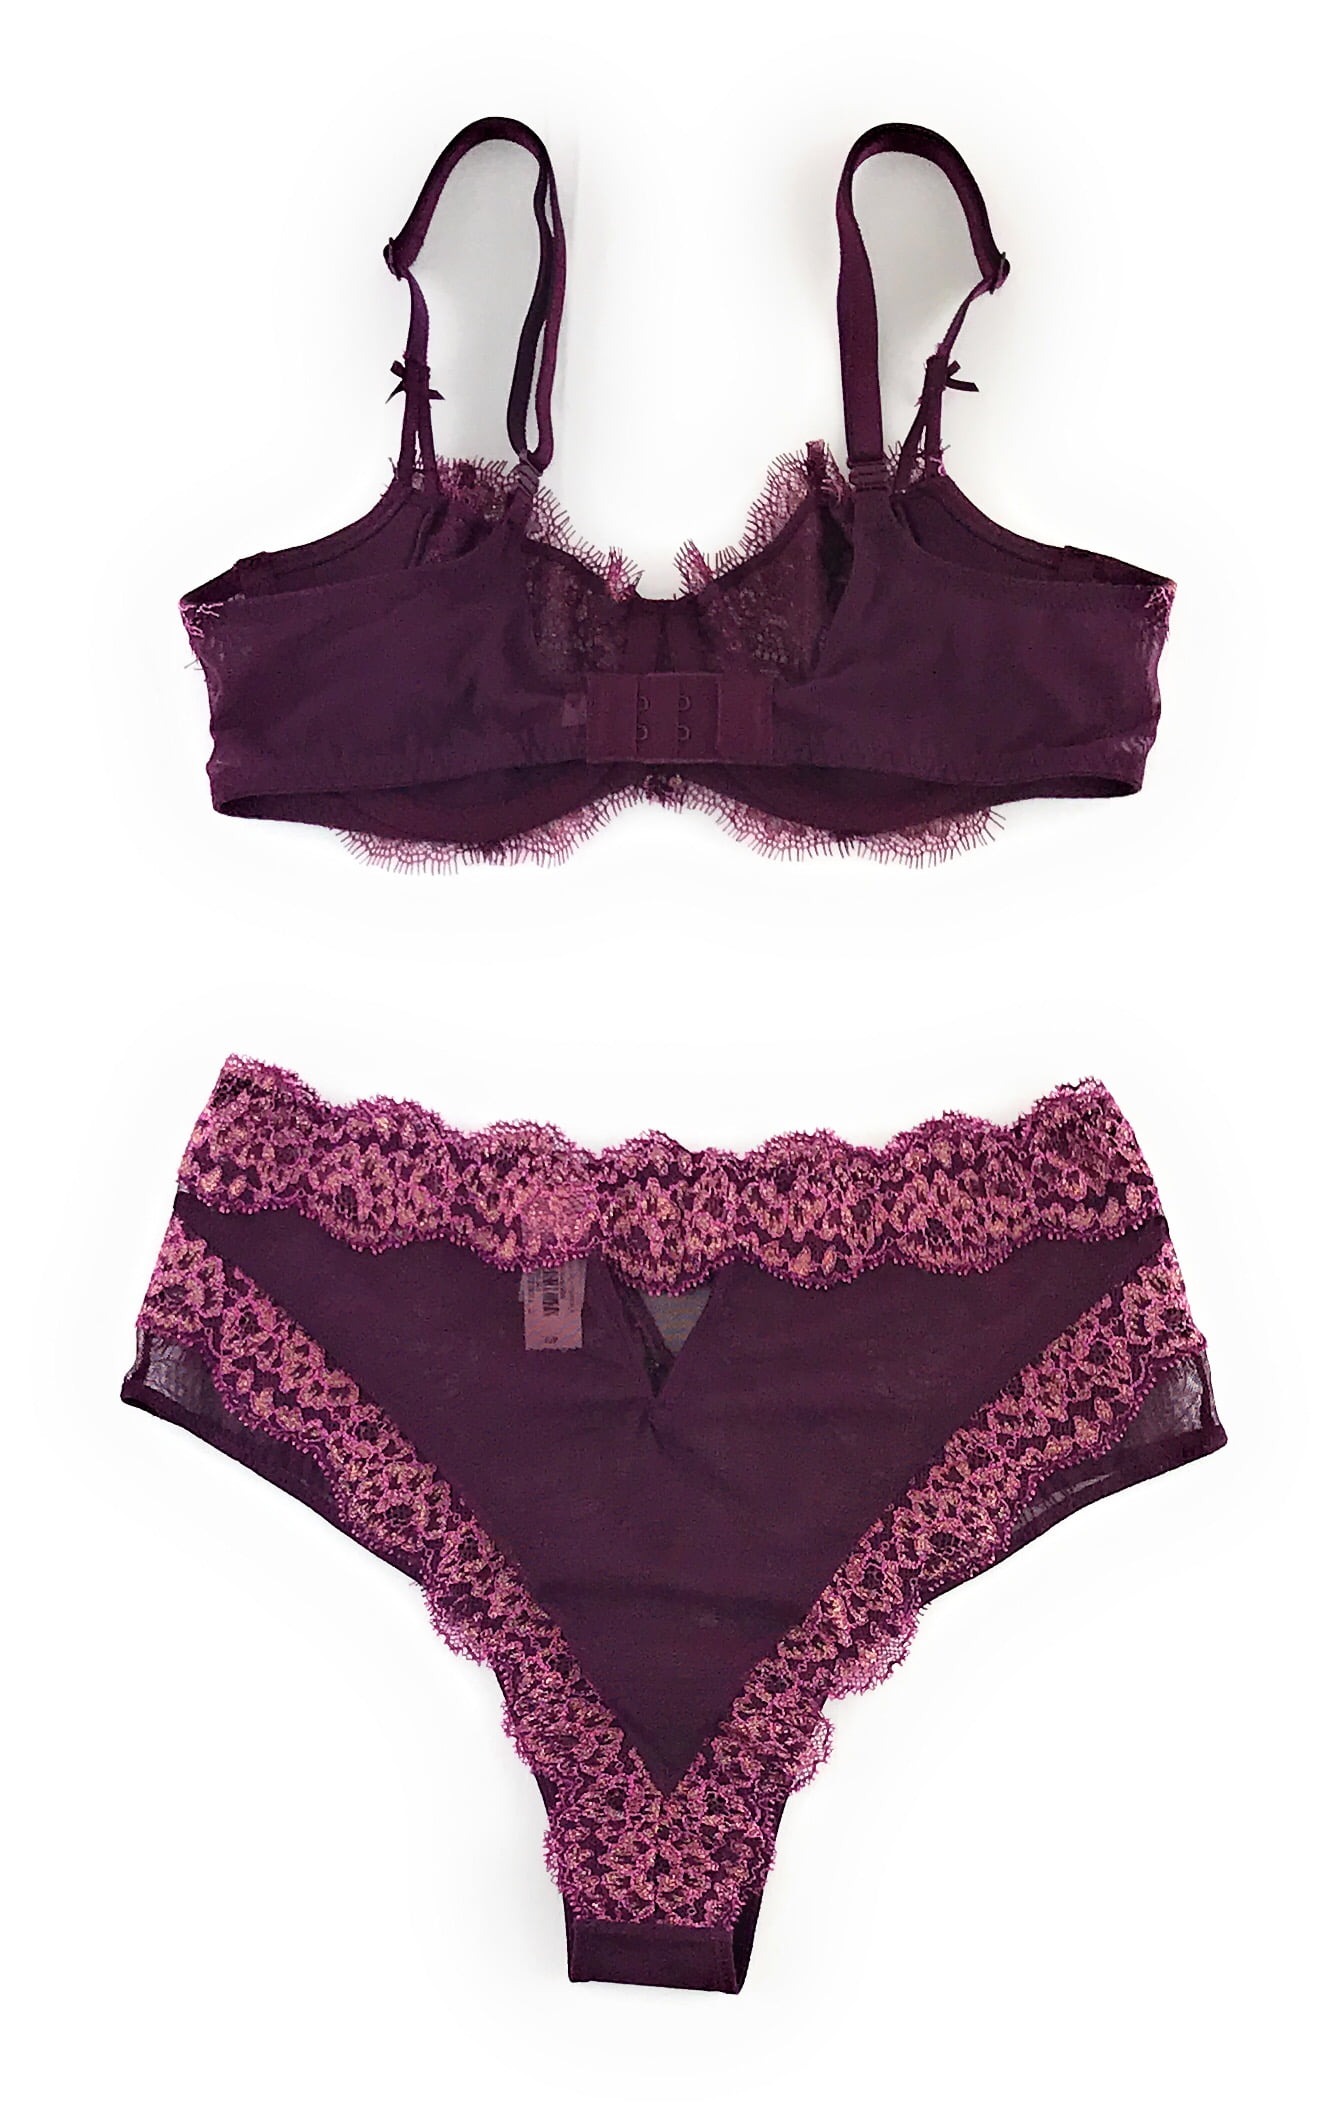 Victoria's Secret Dream Angels Wicked Uplift Bra and High Waist Cheeky  Panty Set 